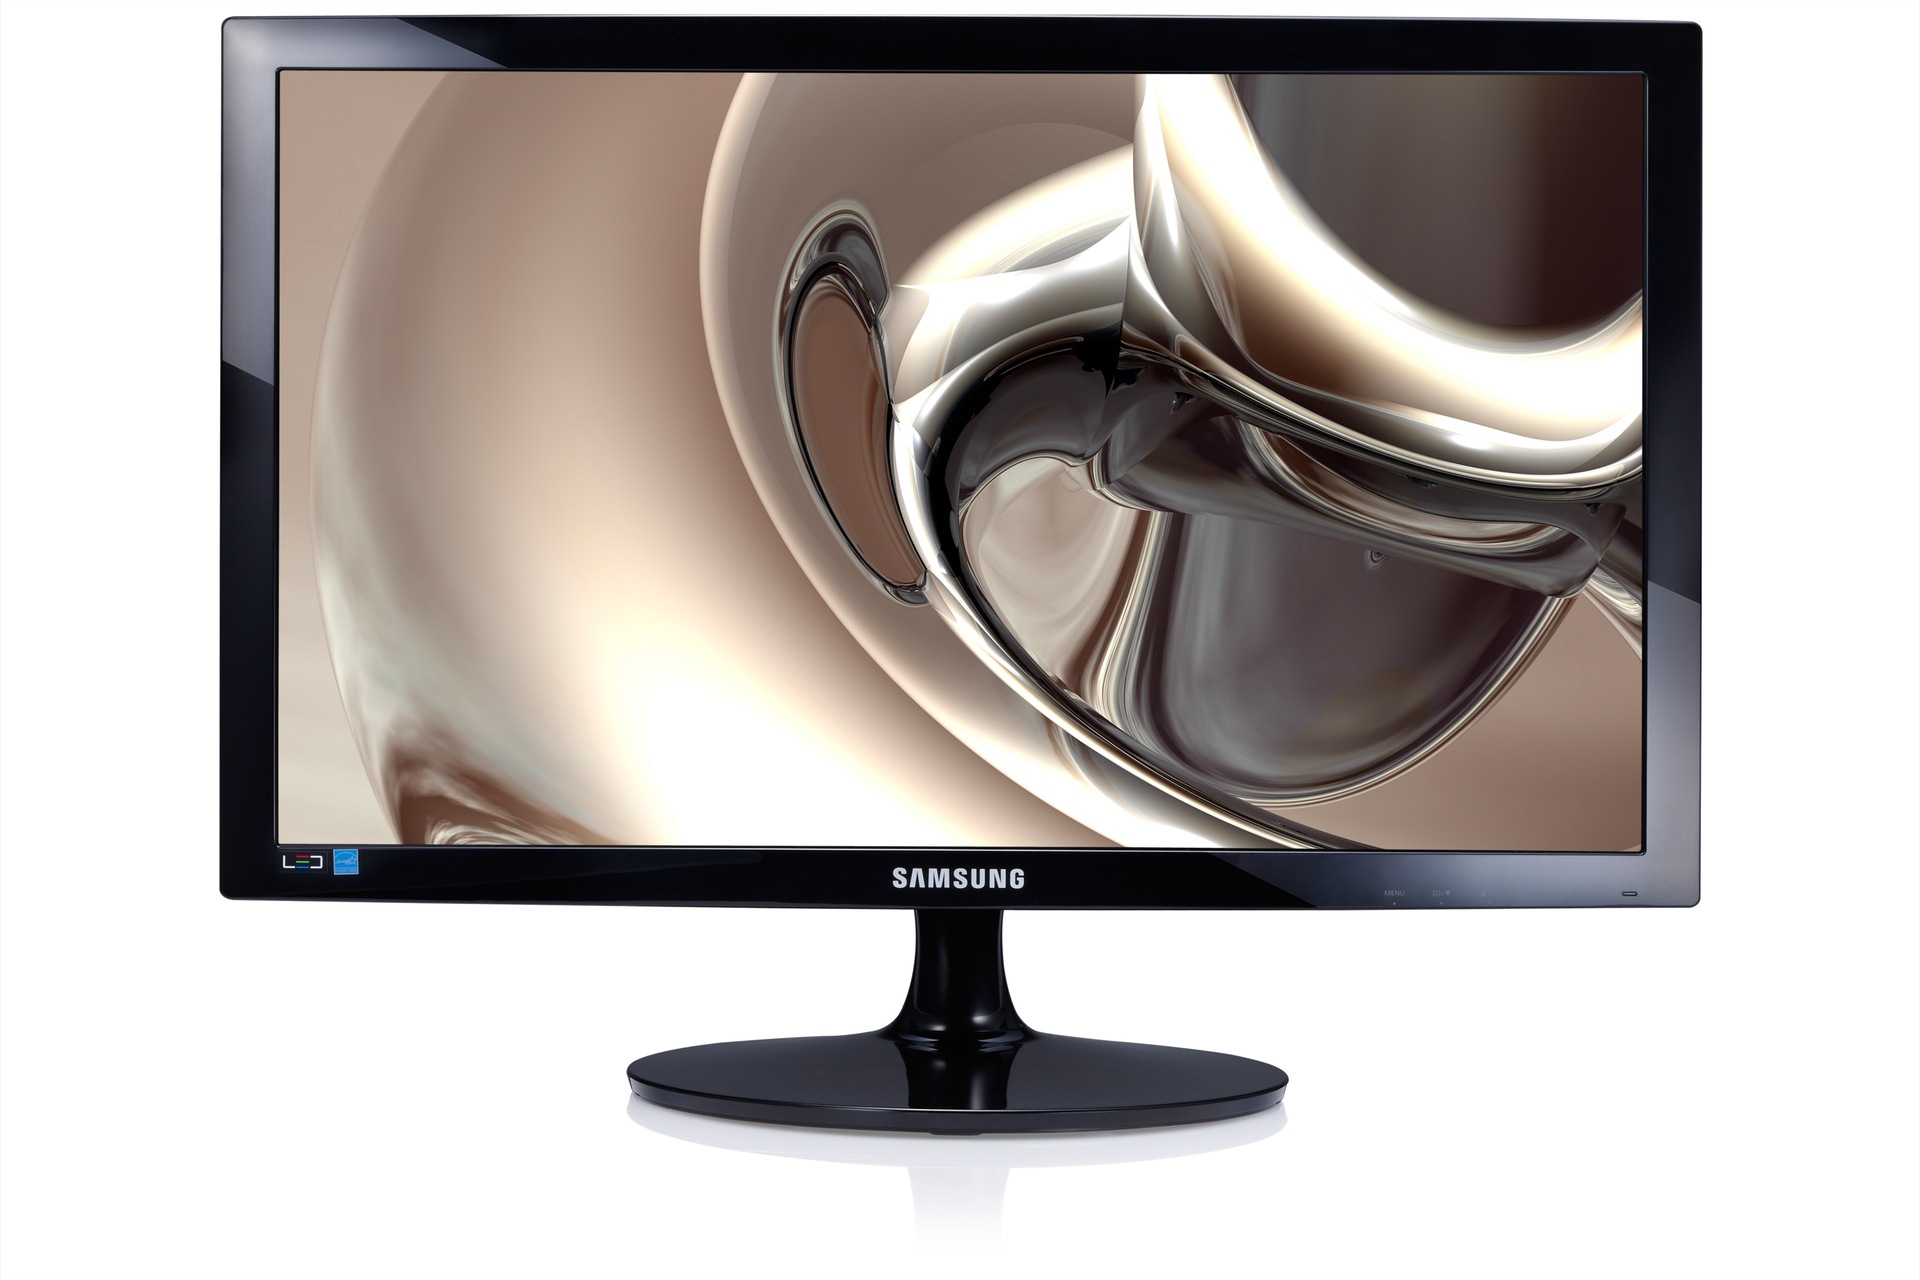 24 inch LED¹ Monitor with sharp picture quality Series 3 S24B300H